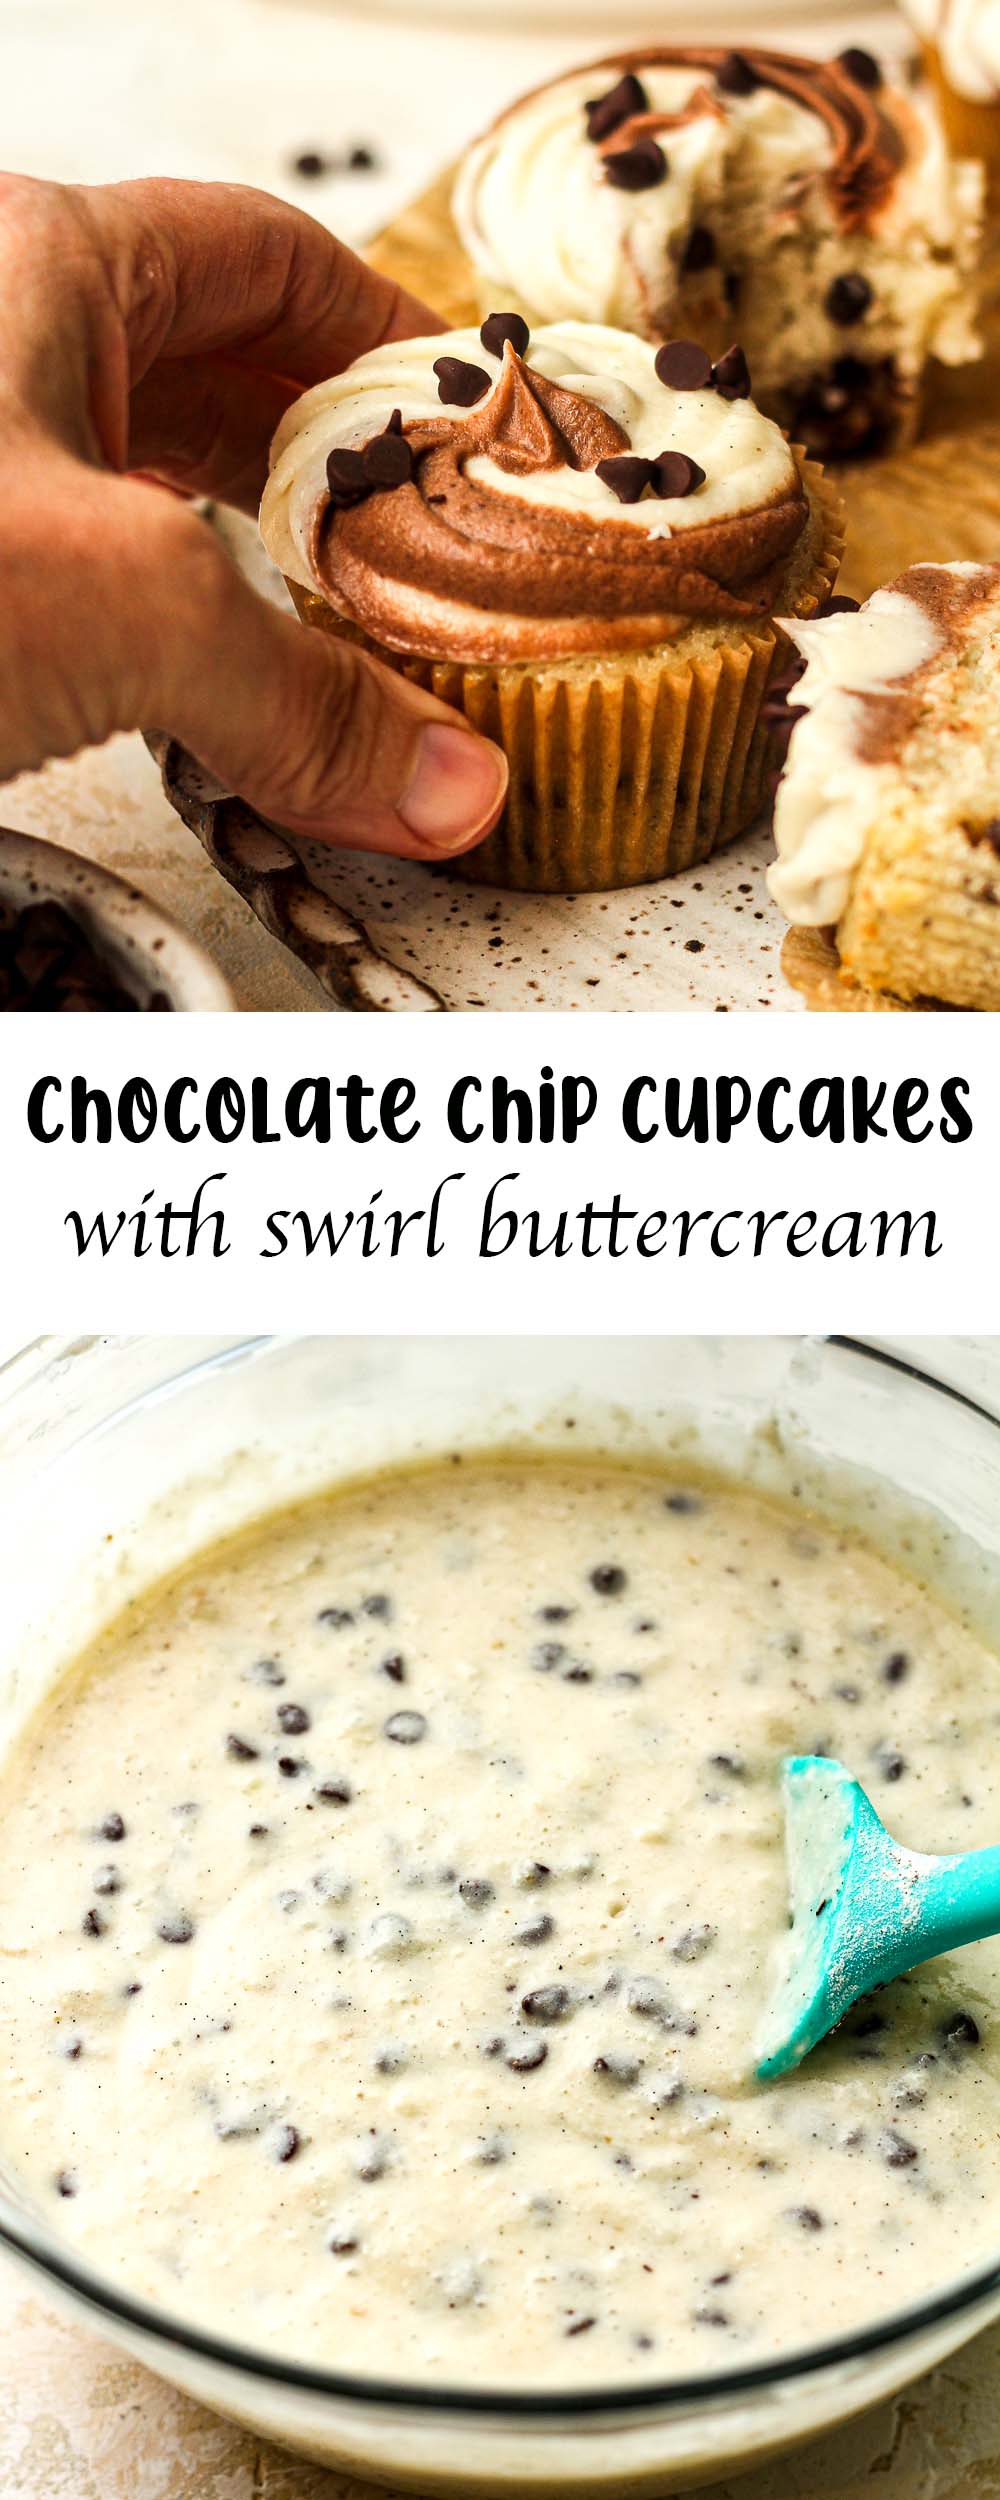 A collage of photos - a hand reaching for a chocolate chip cupcake and another bowl of the batter.